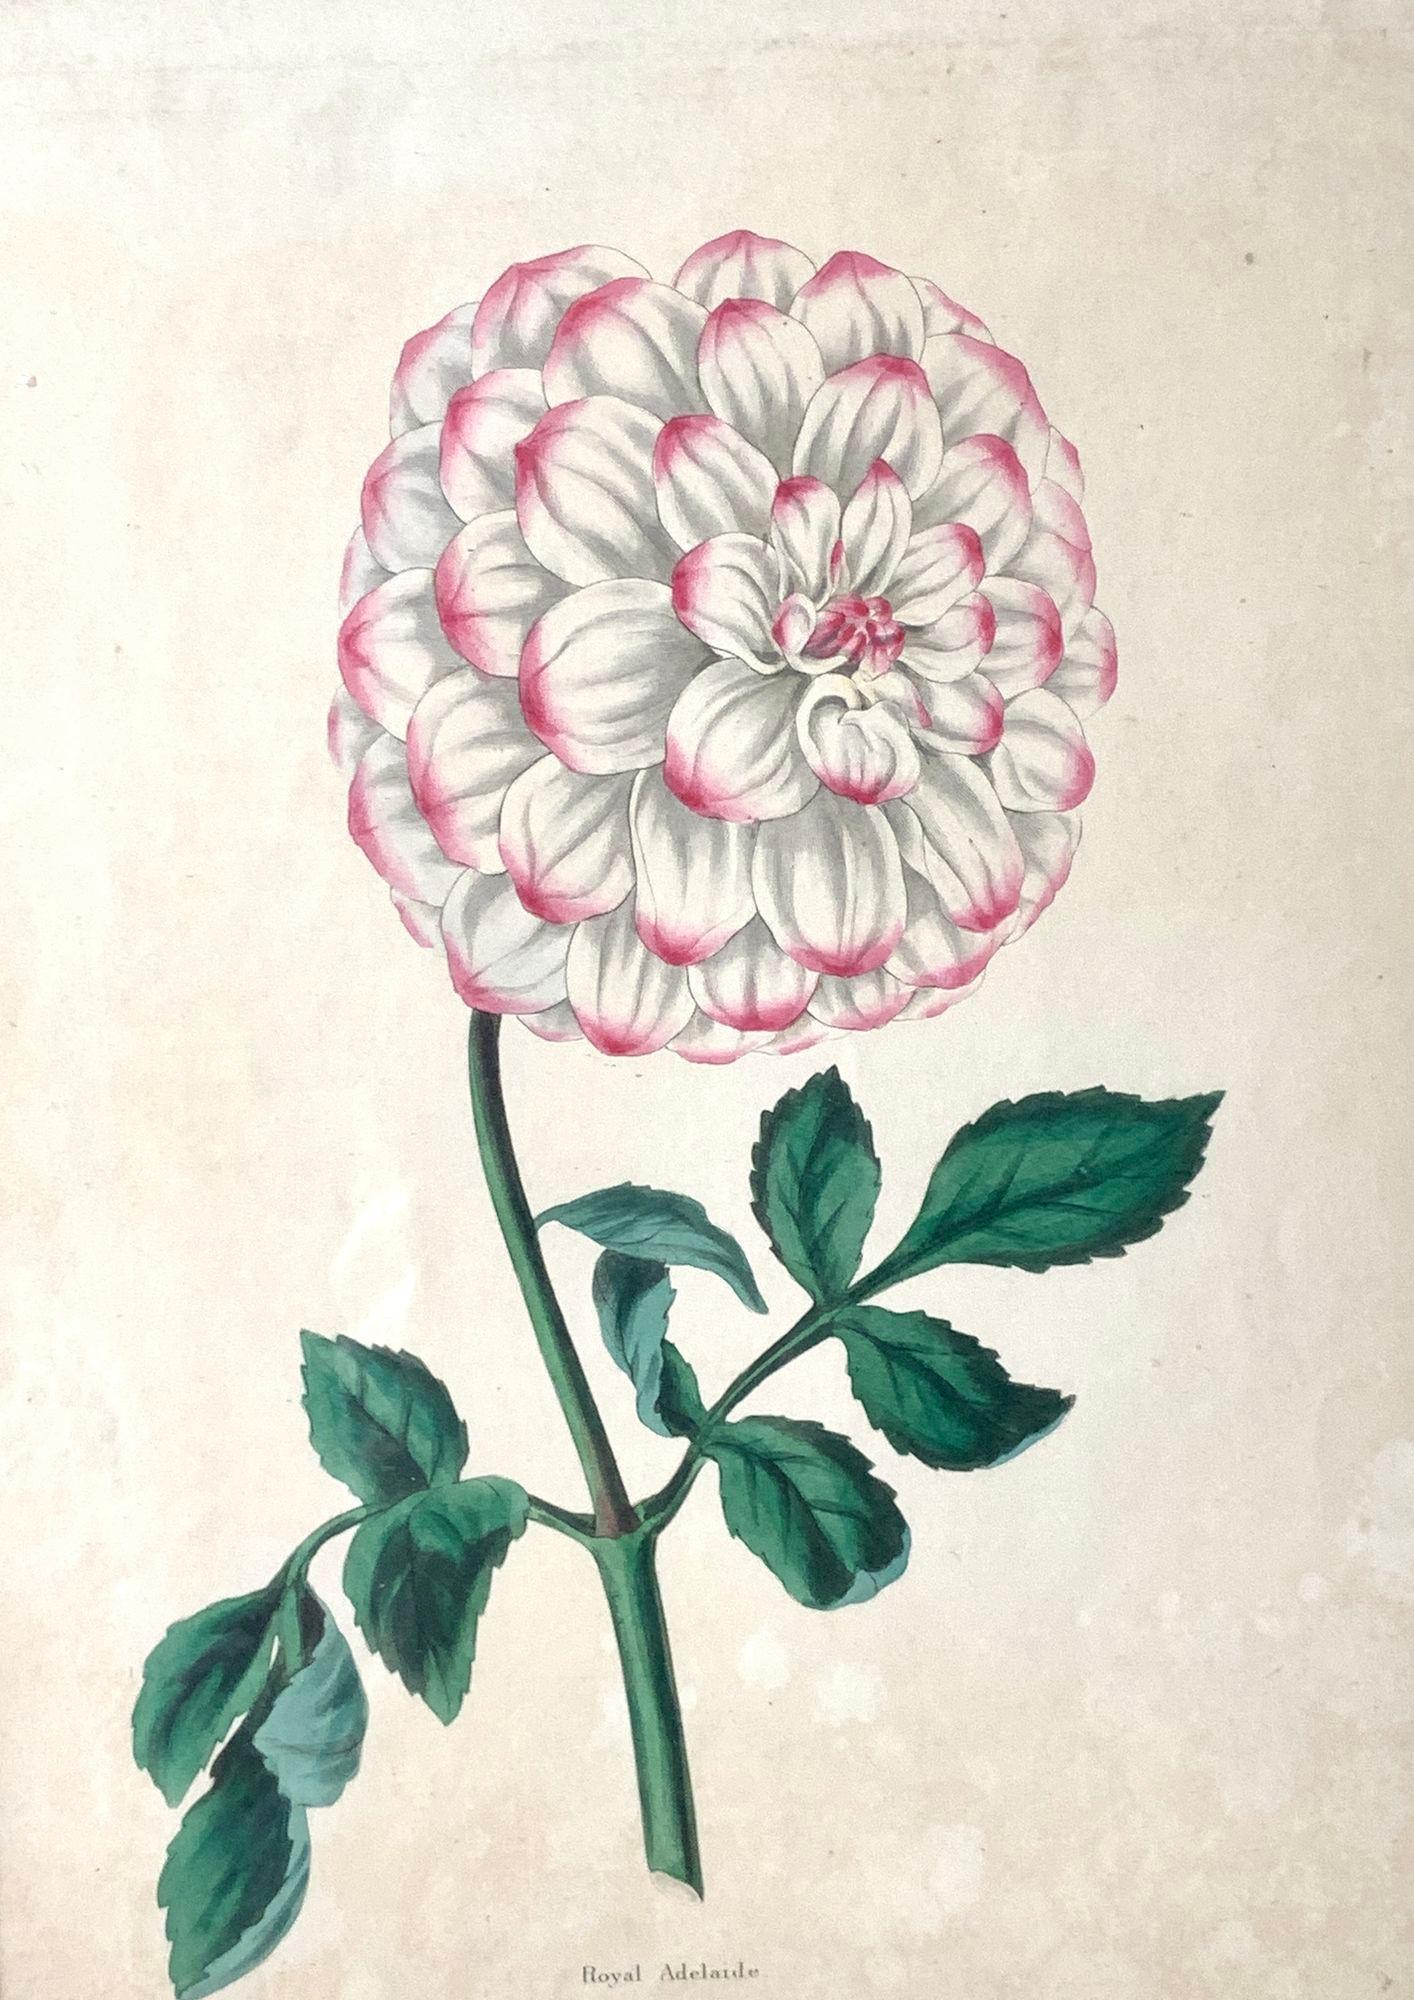 This print of a lifesize dahlia is gorgeous!
Made circa 1850, this botanical print displays the name of the flower written just below the green stem: 